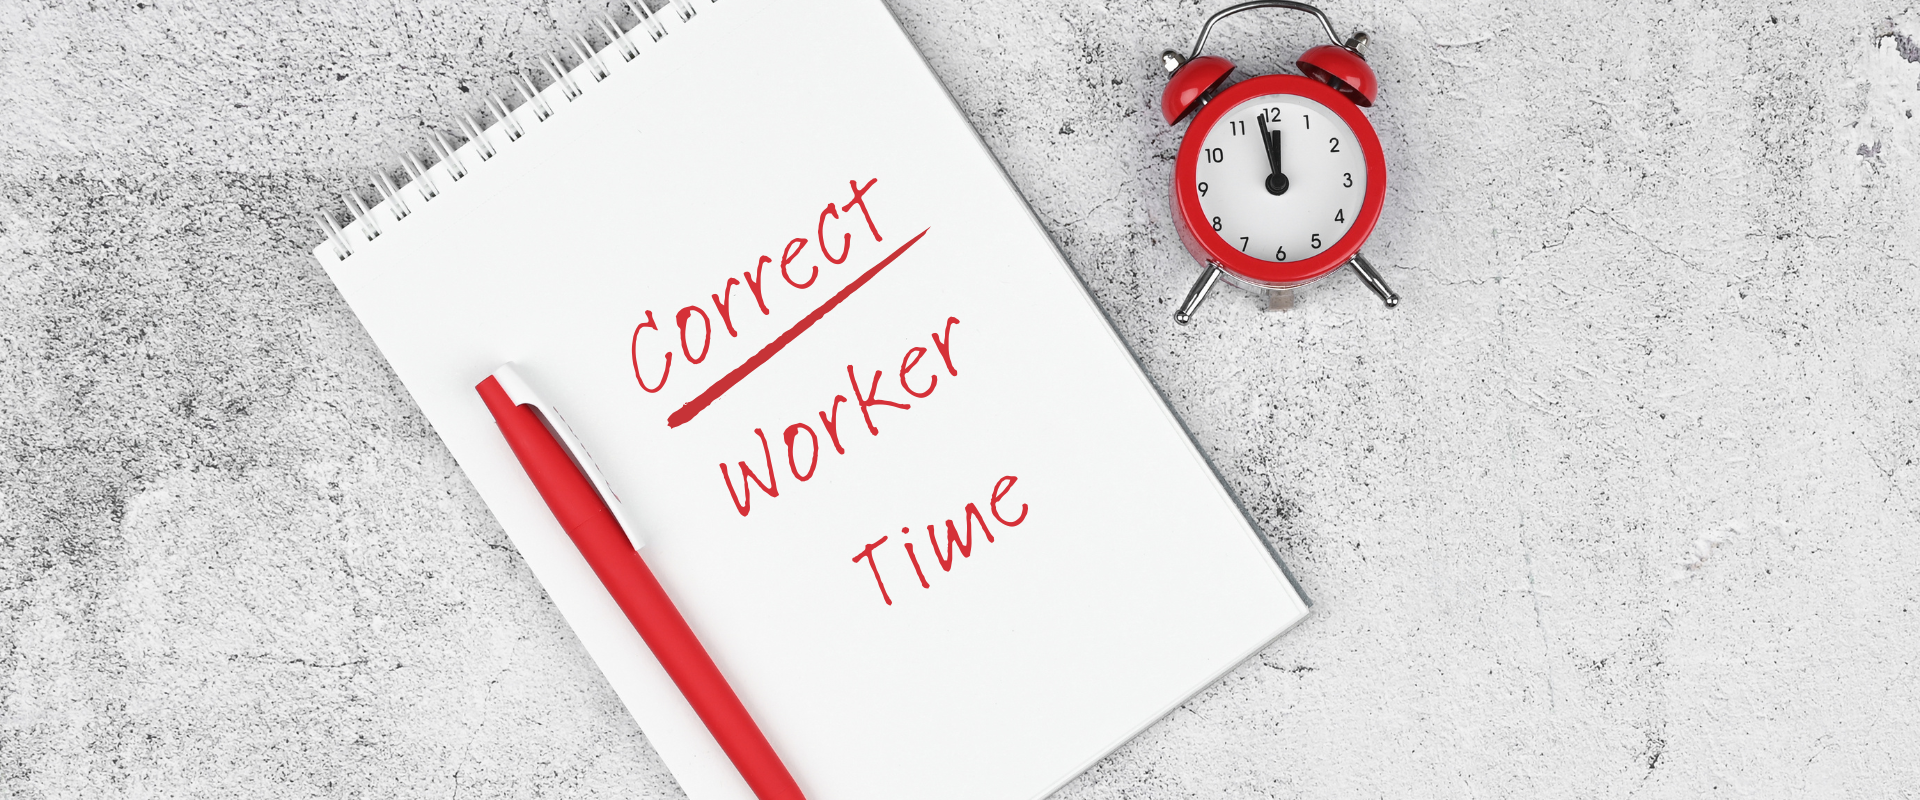 Correct Worker Time notepad with clock